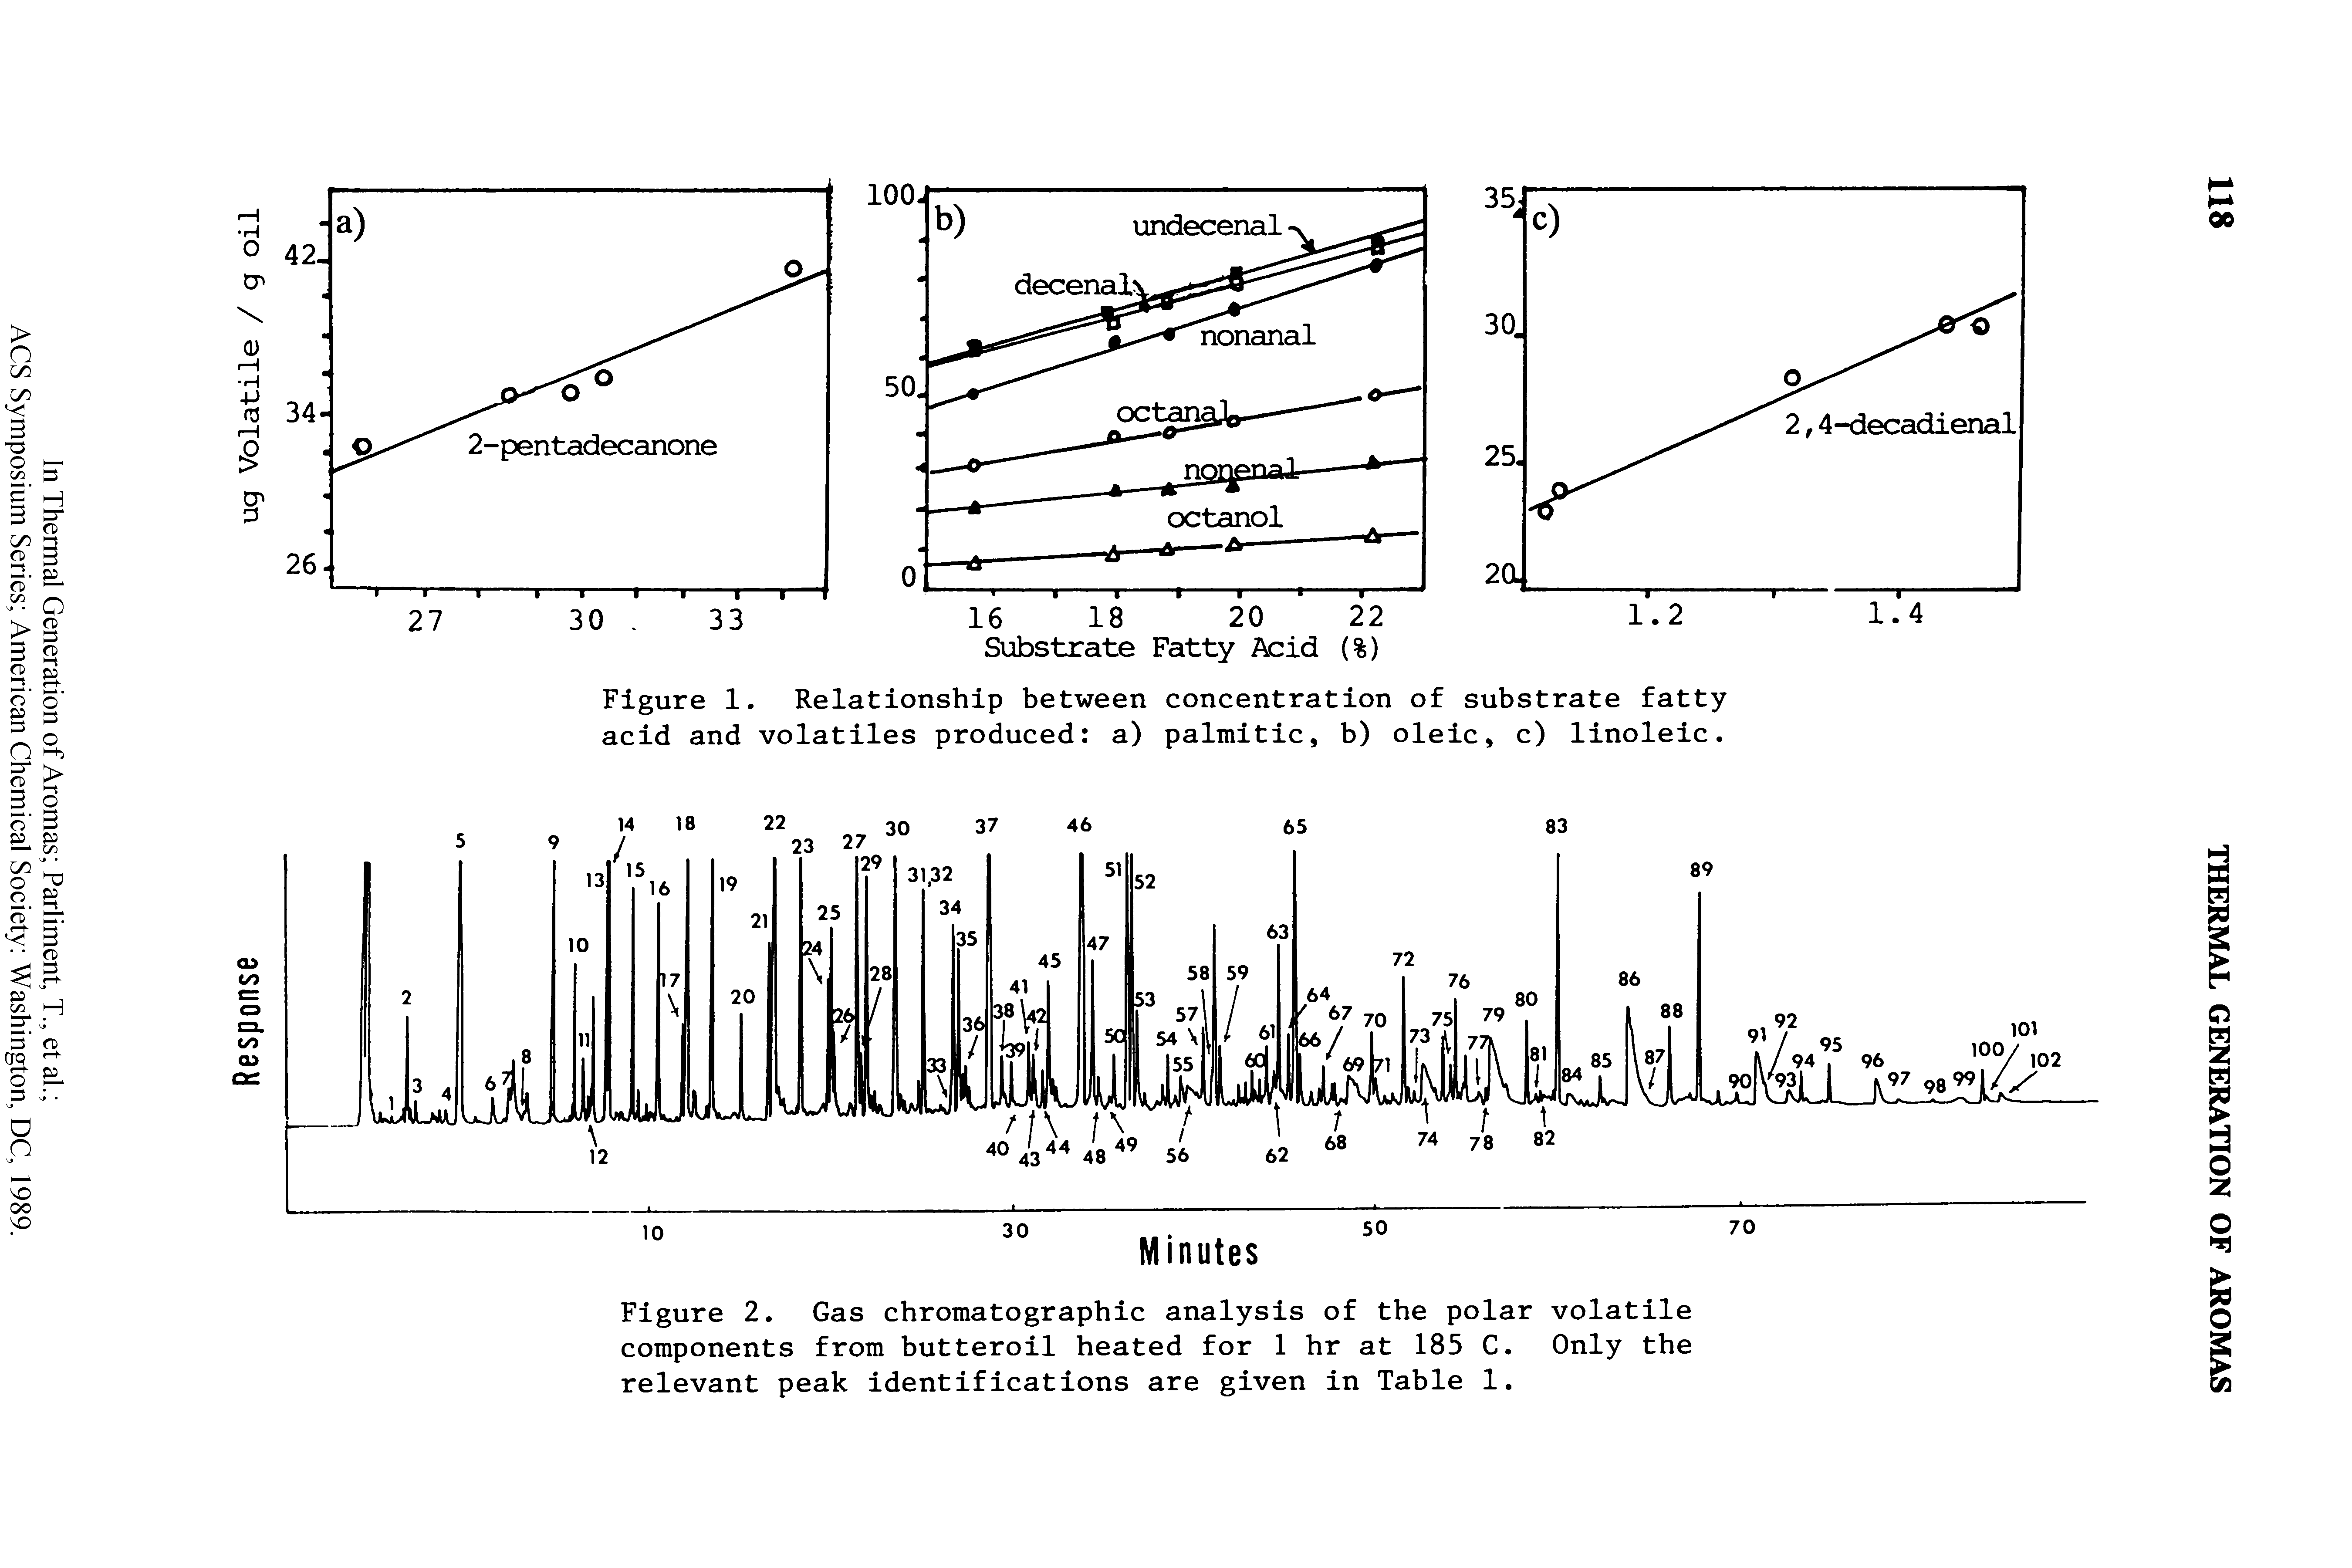 Figure 2. Gas chromatographic analysis of the polar volatile components from butteroil heated for 1 hr at 185 C. Only the relevant peak identifications are given in Table 1.